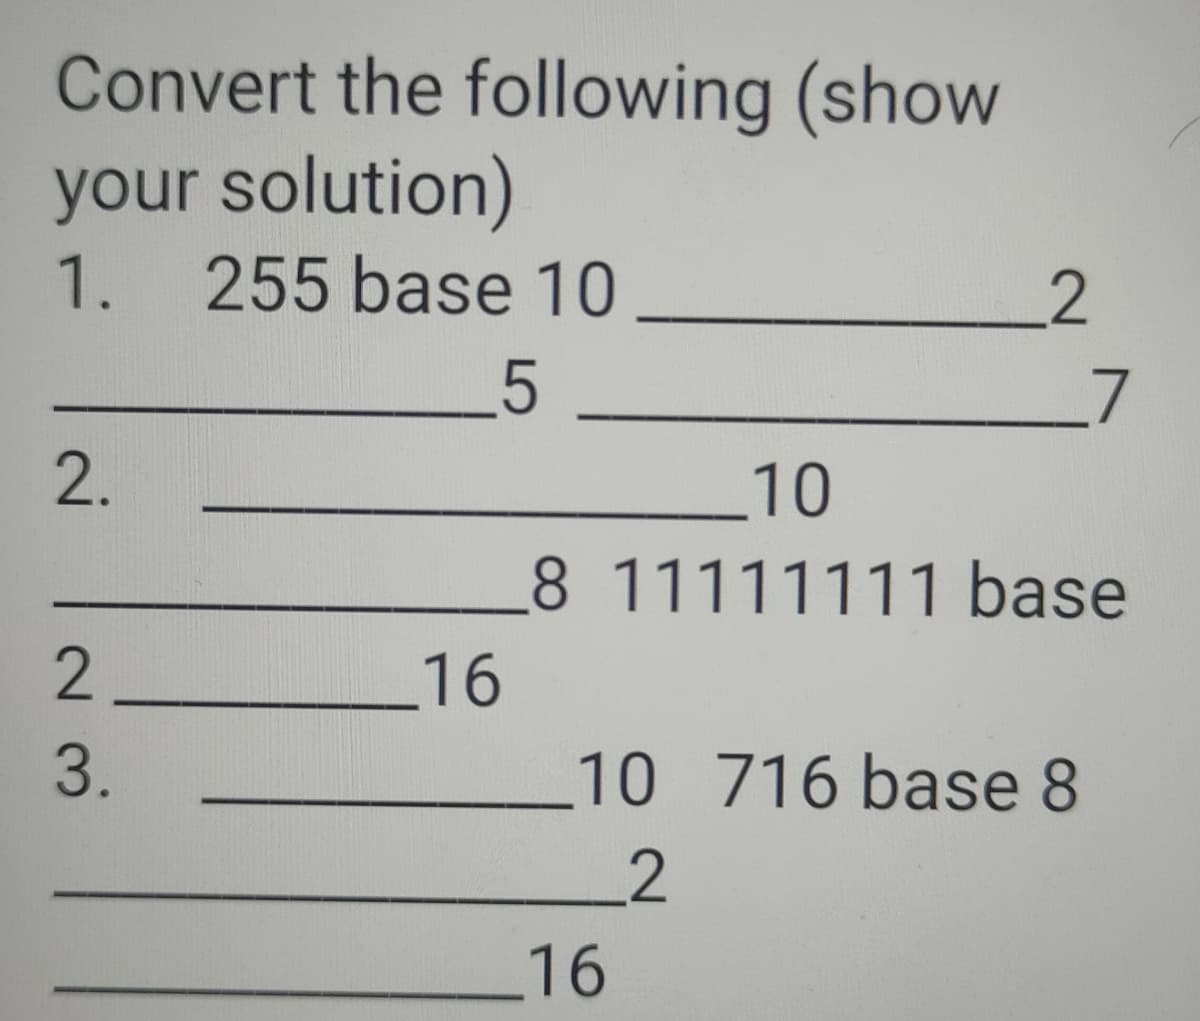 Convert the following (show
your solution)
1. 255 base 10
_5
L7
2.
10
8 11111111 base
2
16
3.
10 716 base 8
2.
16
